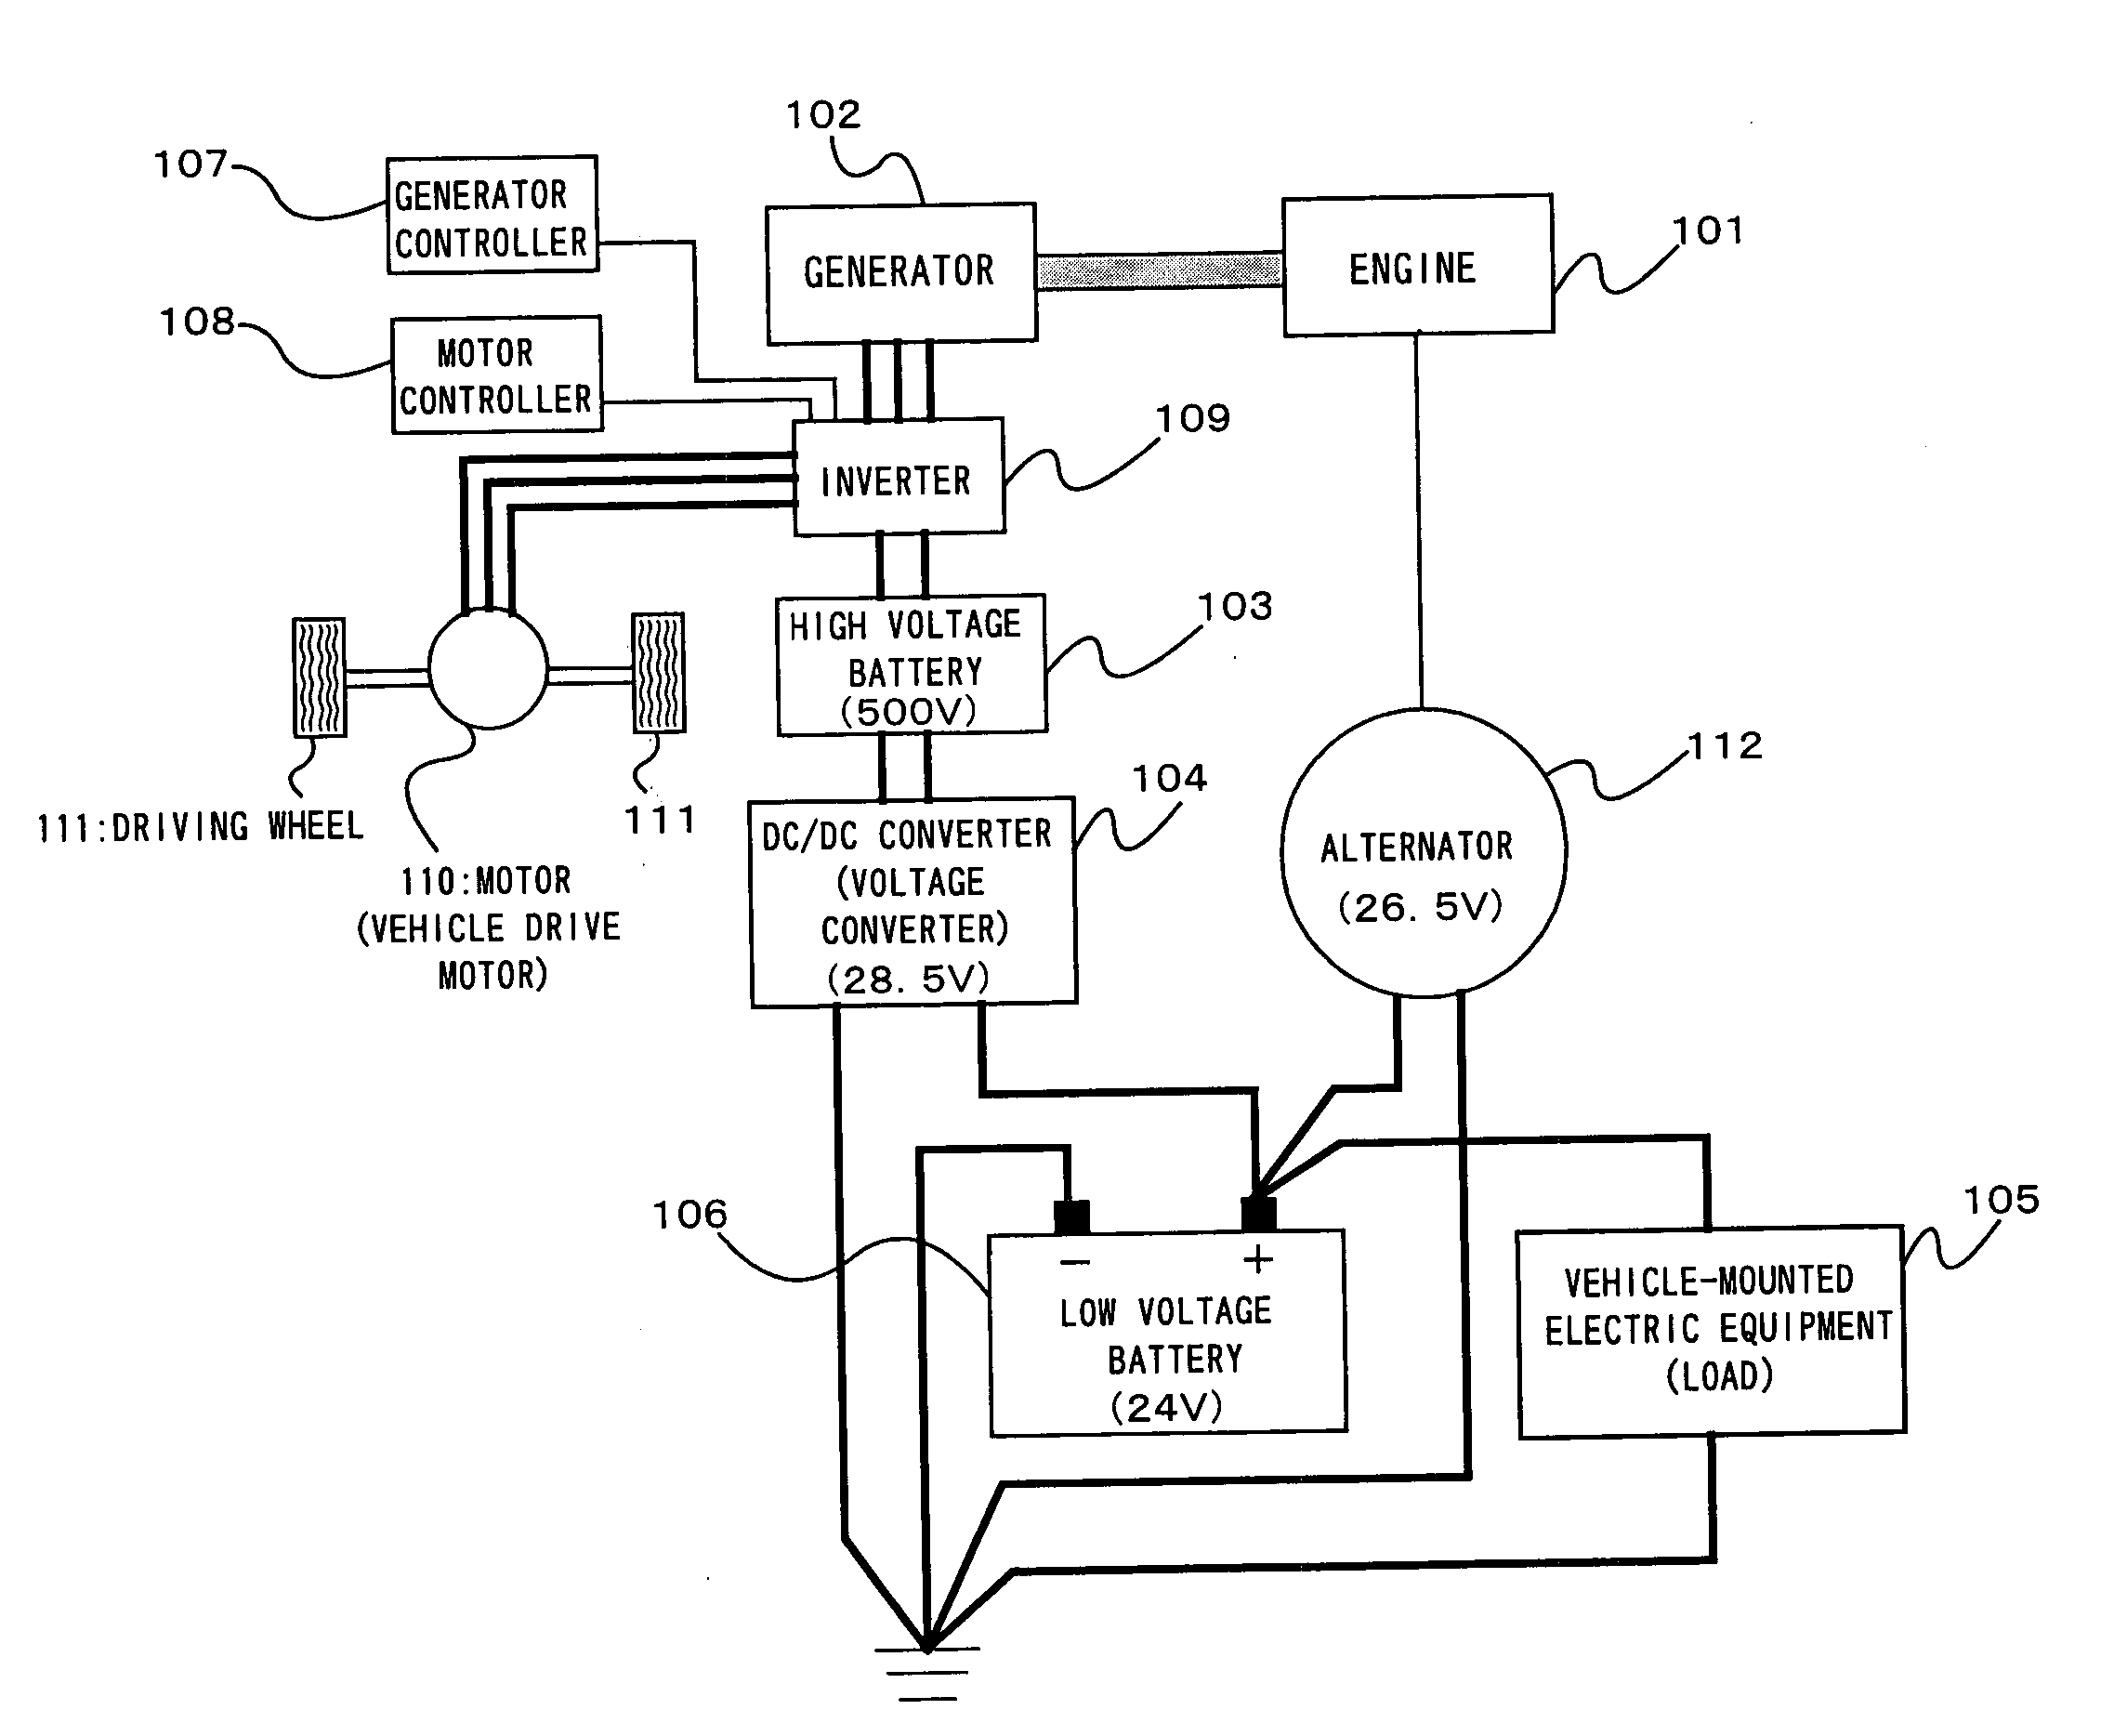 Battery charging system for hybrid electric vehicles